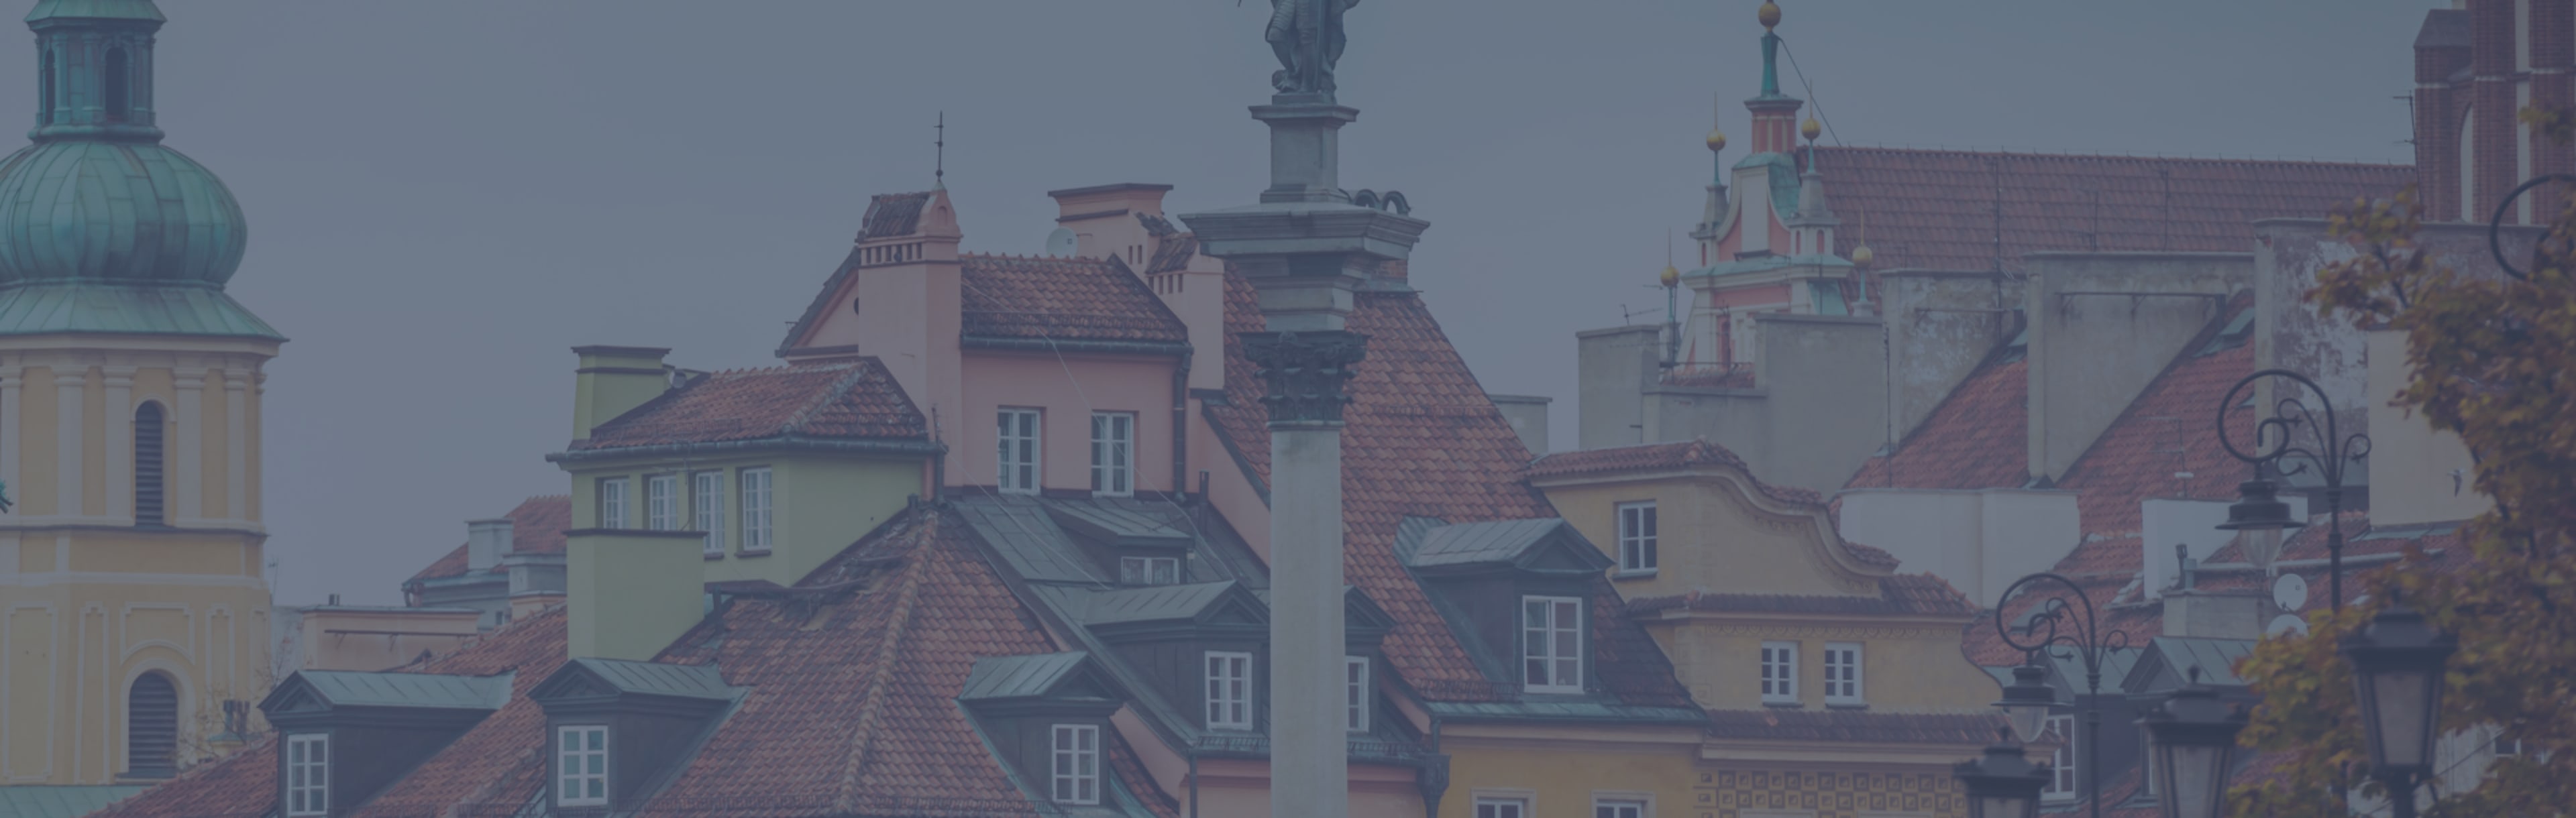 Contact Schools Directly - Compare multiple LLM Programs in Commercial Law in Poland 2023